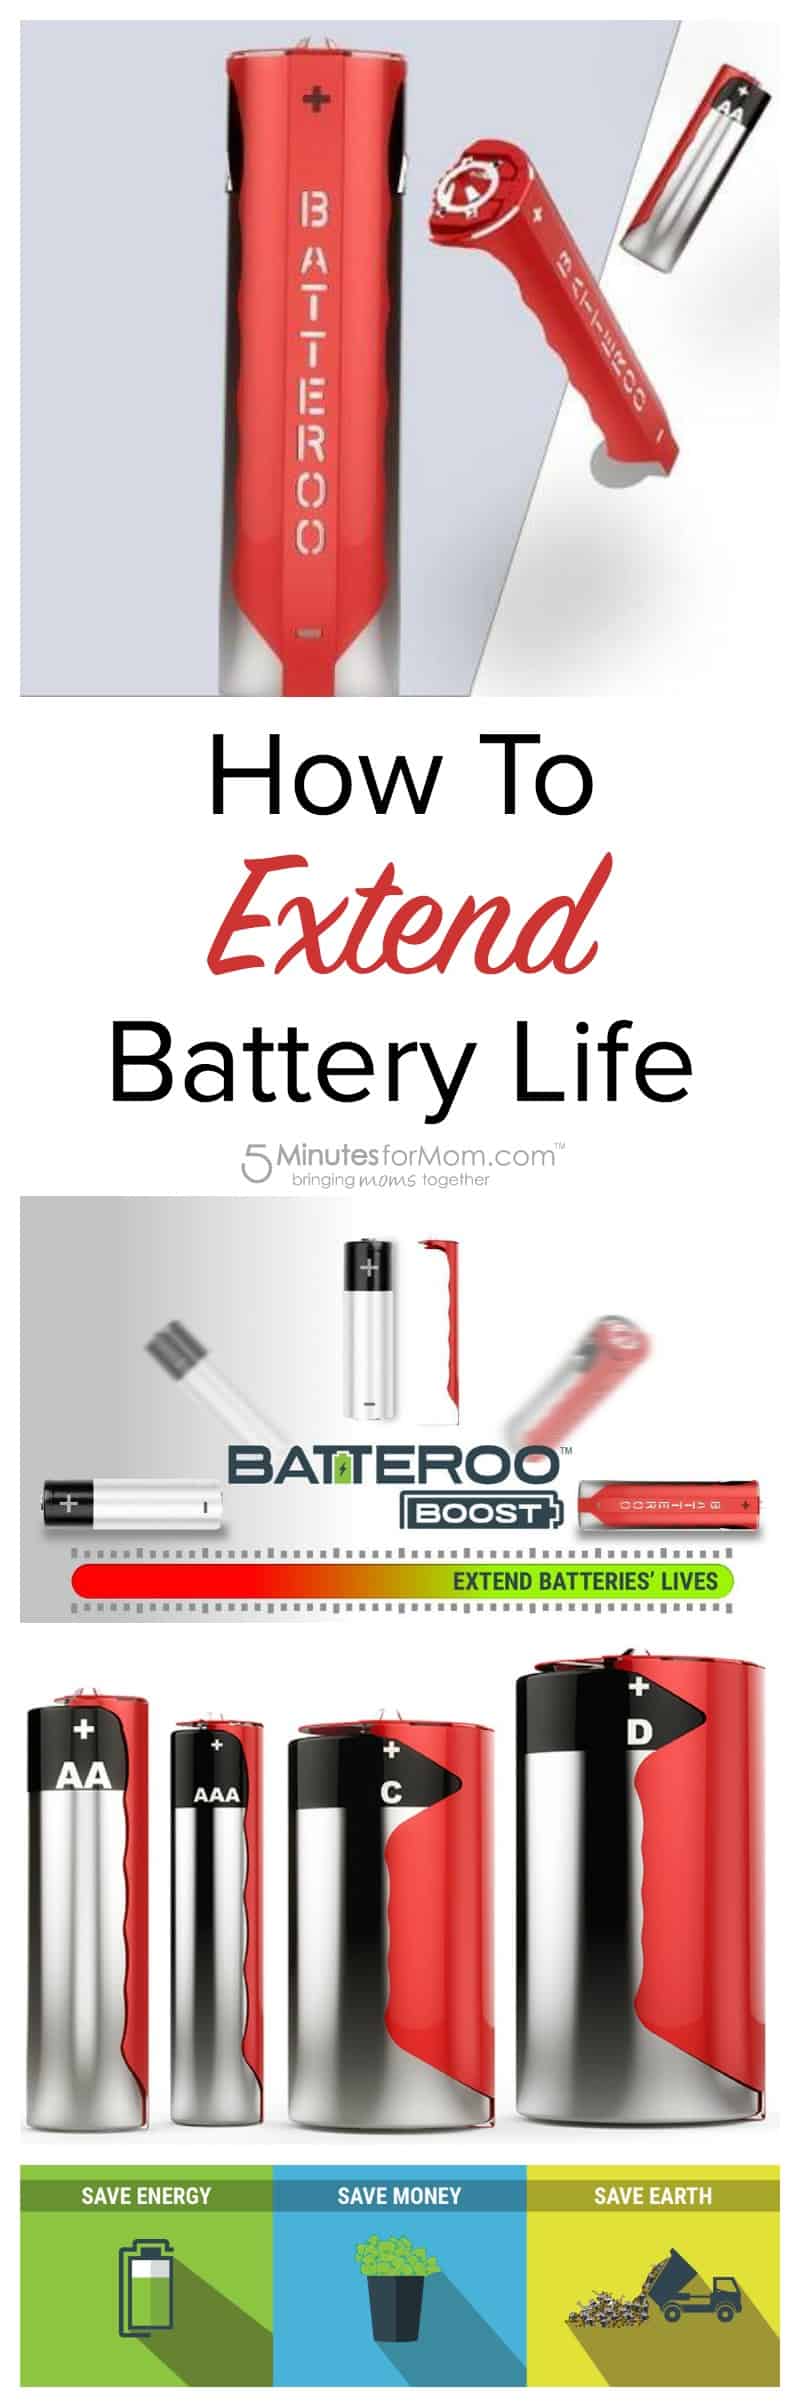 How to extend battery life